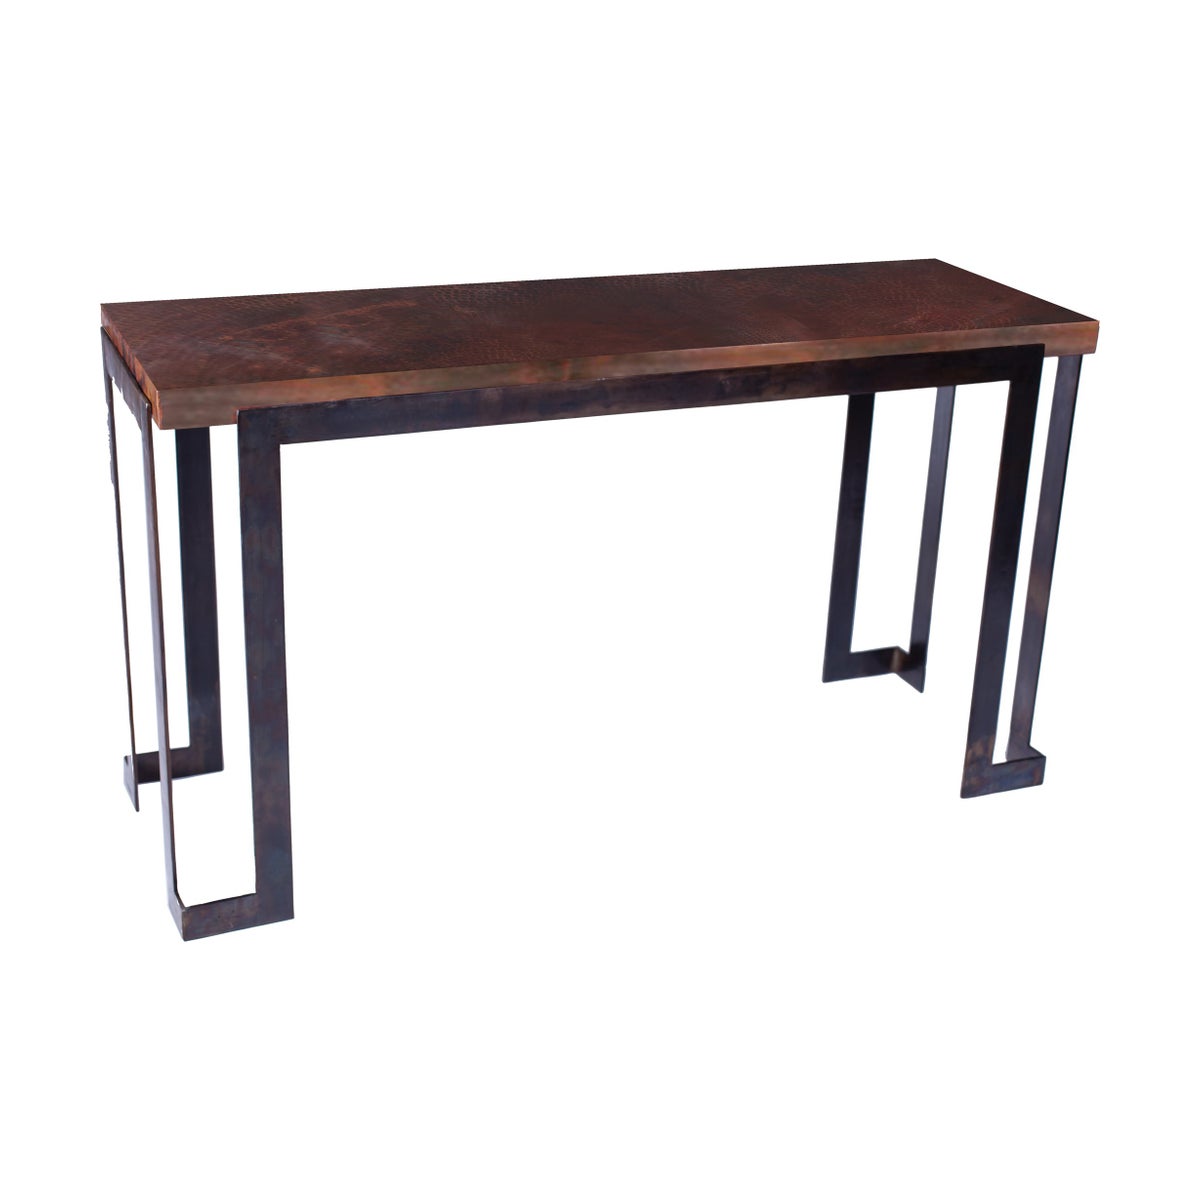 Steel Strap Console Table with Dark Brown Hammered Copper Top